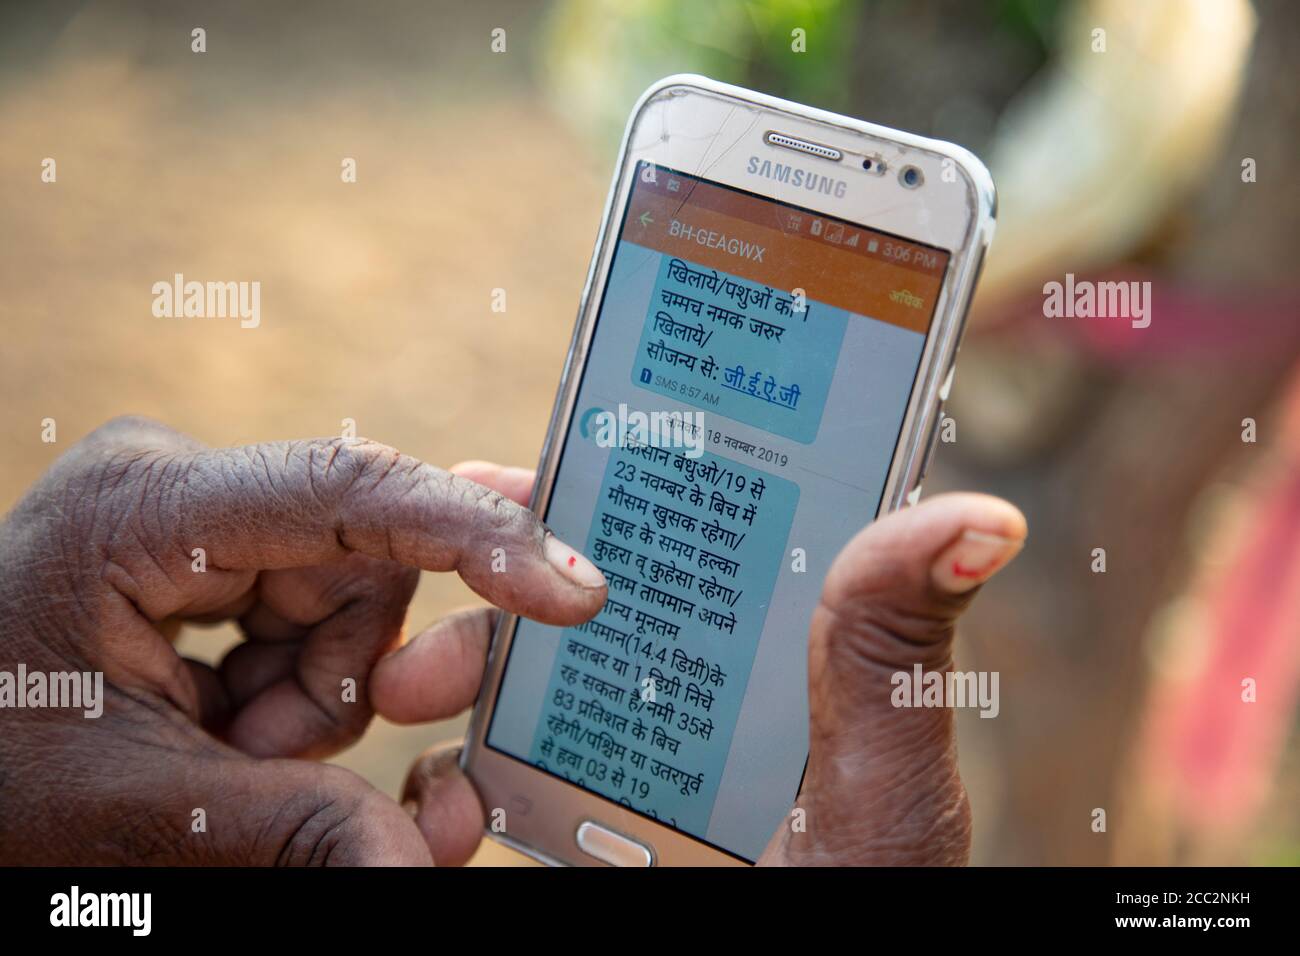 An elderly woman reads a text message sent to her on her mobile phone as part of the early warning system established by LWR’s Transboundary Flood Resilience Project. Such text messages are sent out to residents of communities living in the Gandak and Koshi river basins in order for them to receive accurate information on area weather forecasts and flood levels upstream. Stock Photo